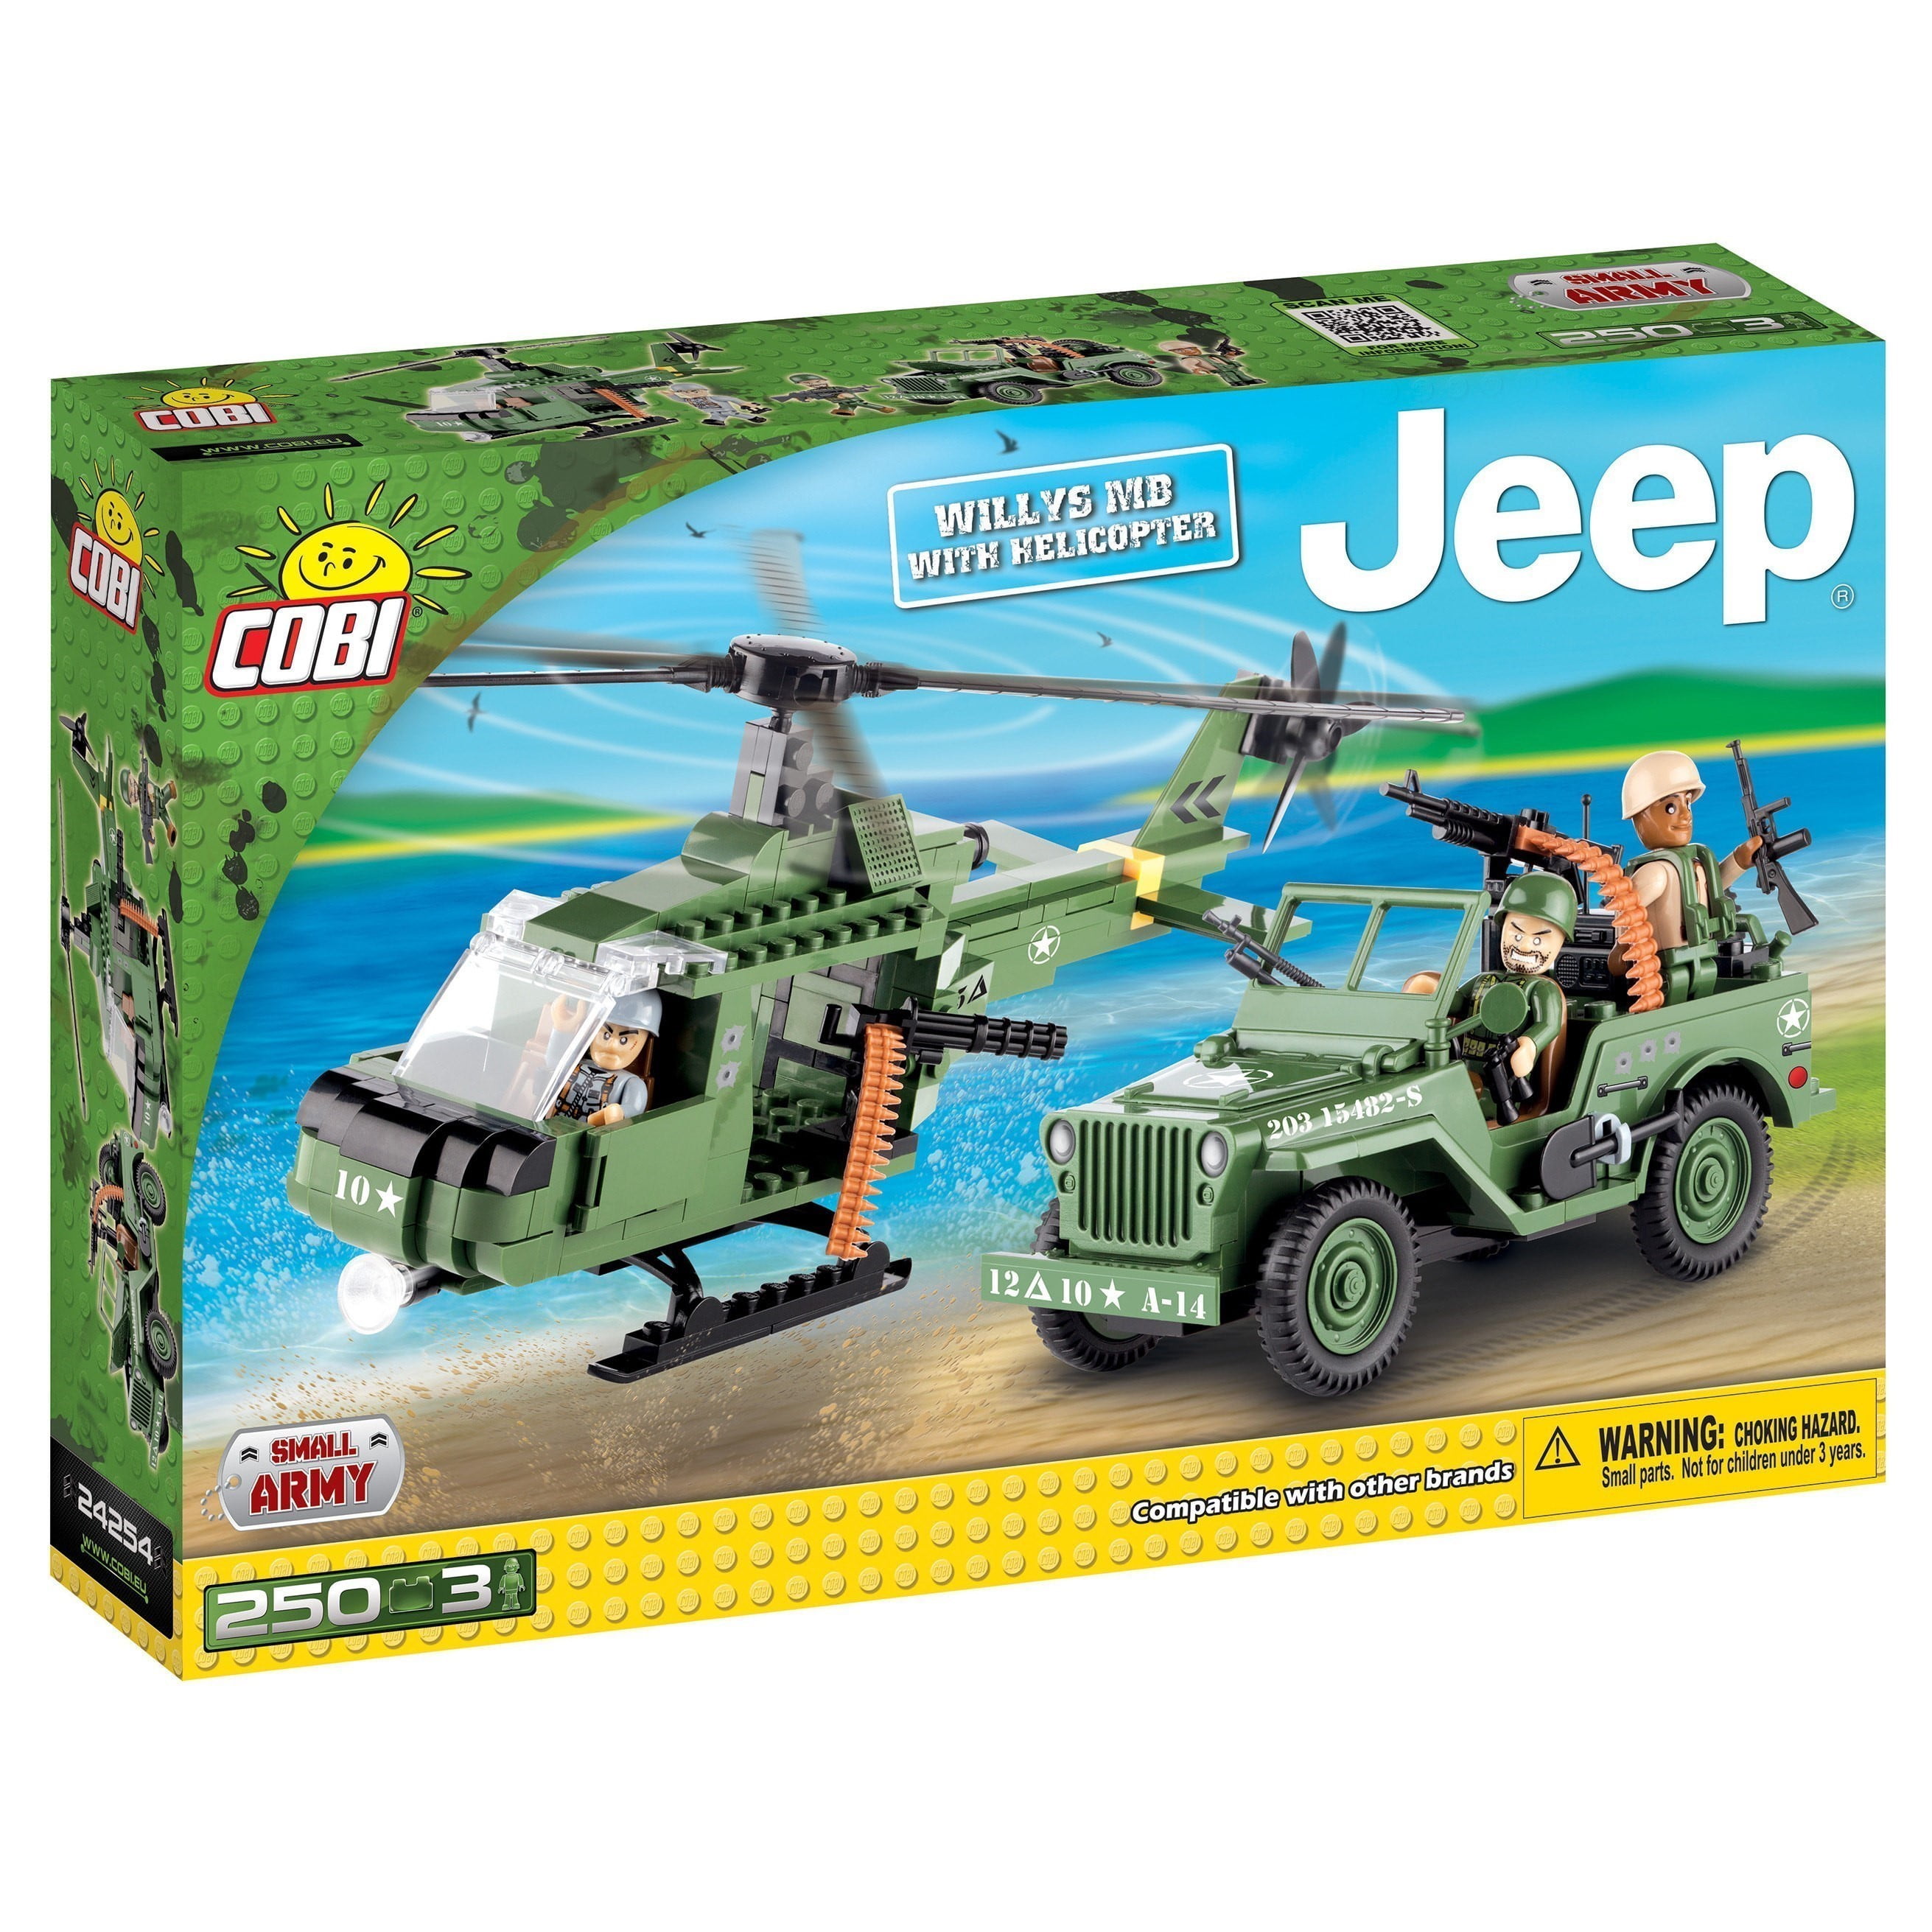 Cobi Army / Military Building Set Bricks Willys MB Jeep With Helicopter 